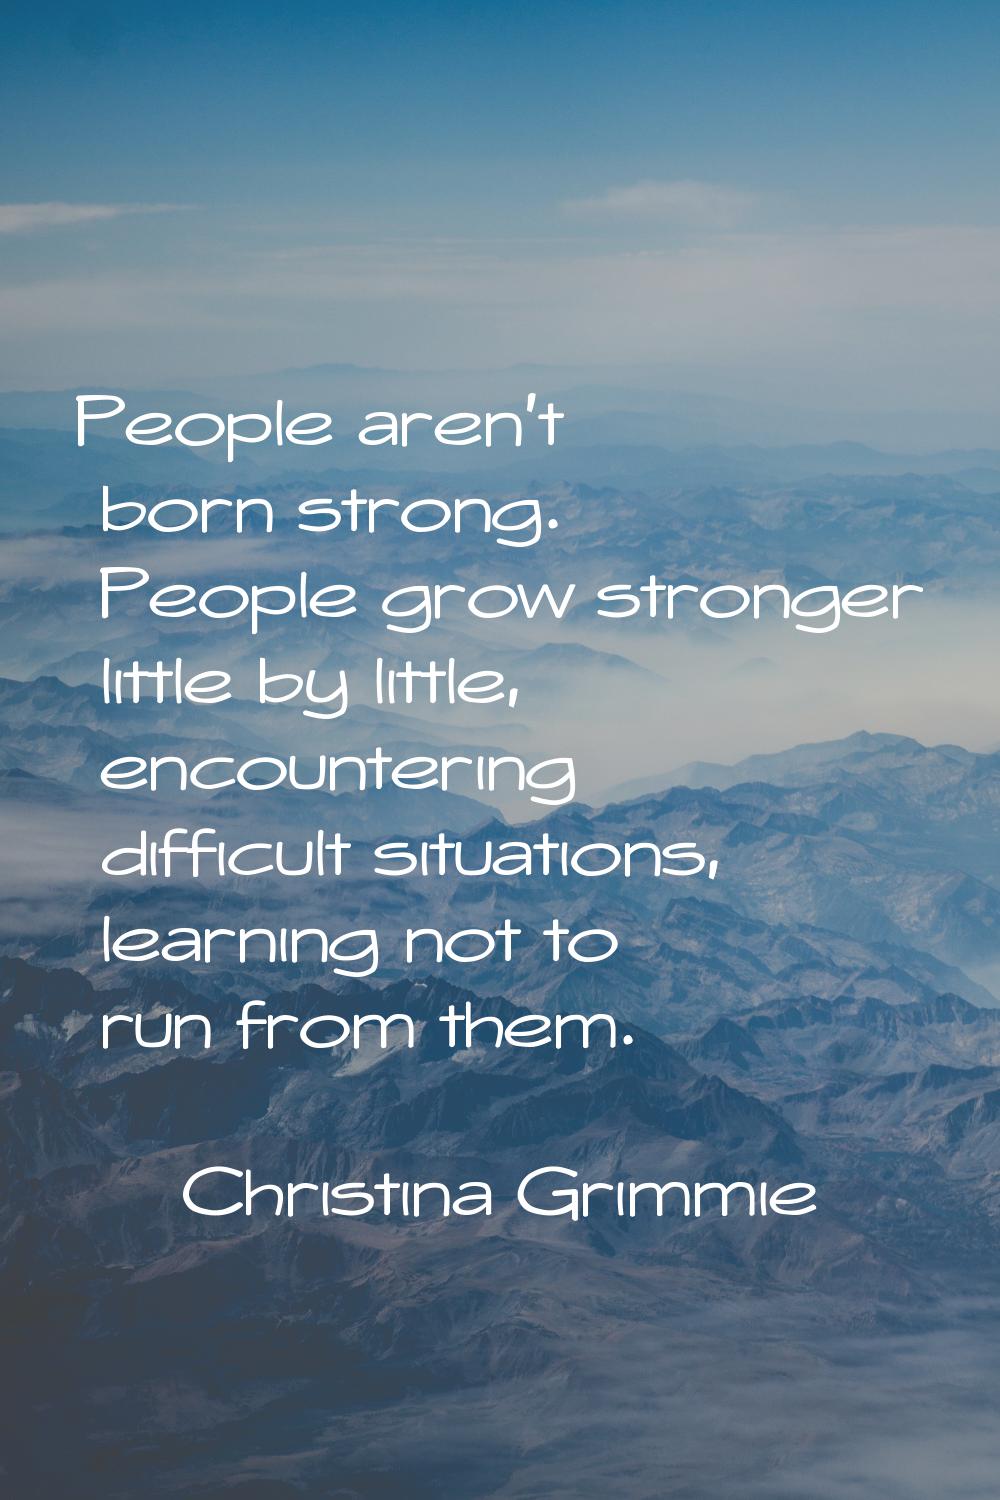 People aren't born strong. People grow stronger little by little, encountering difficult situations